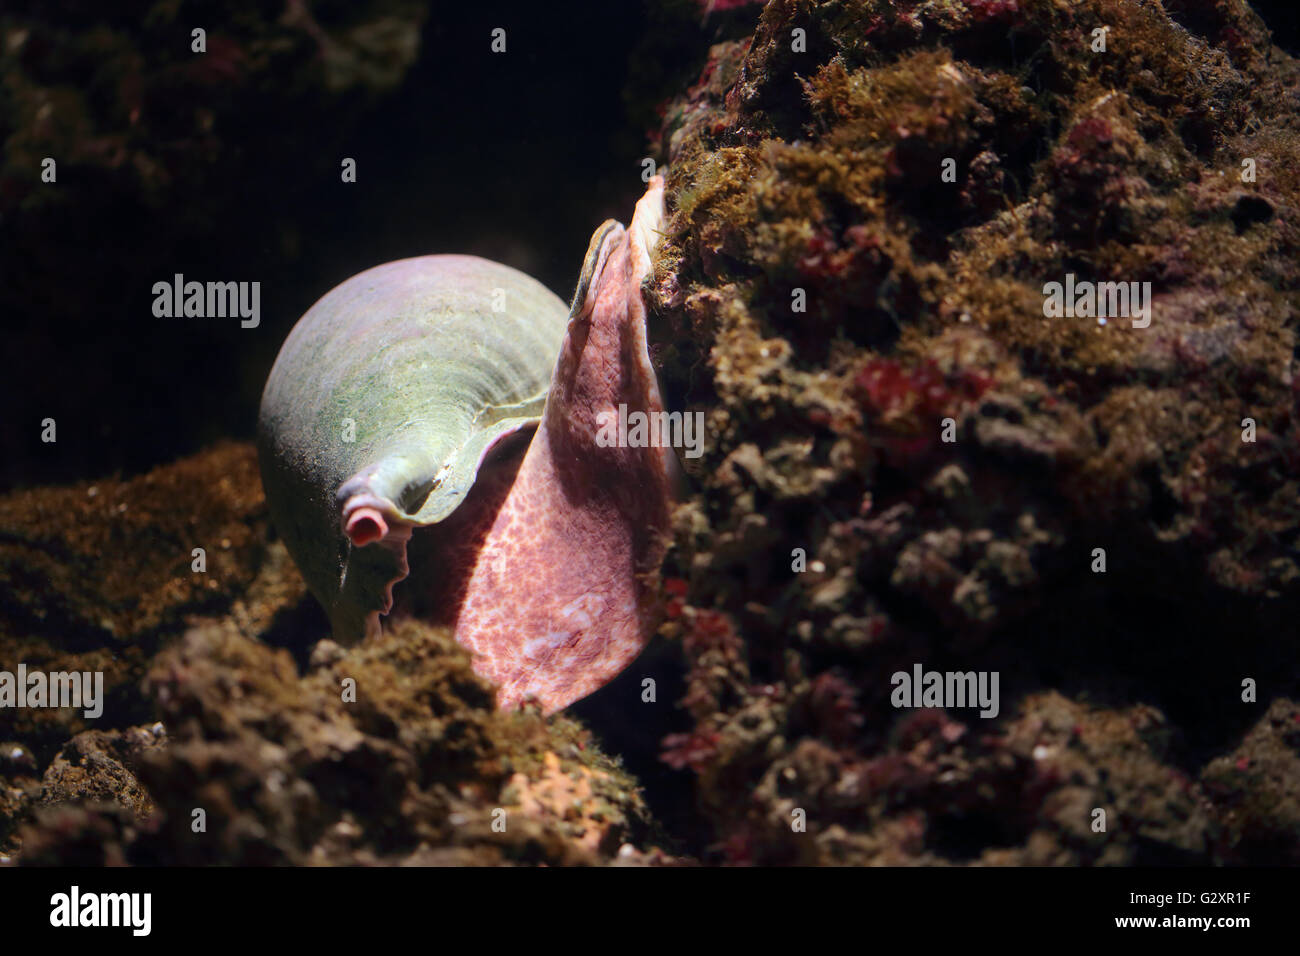 Sea snail on a coral rock on the seabed Stock Photo